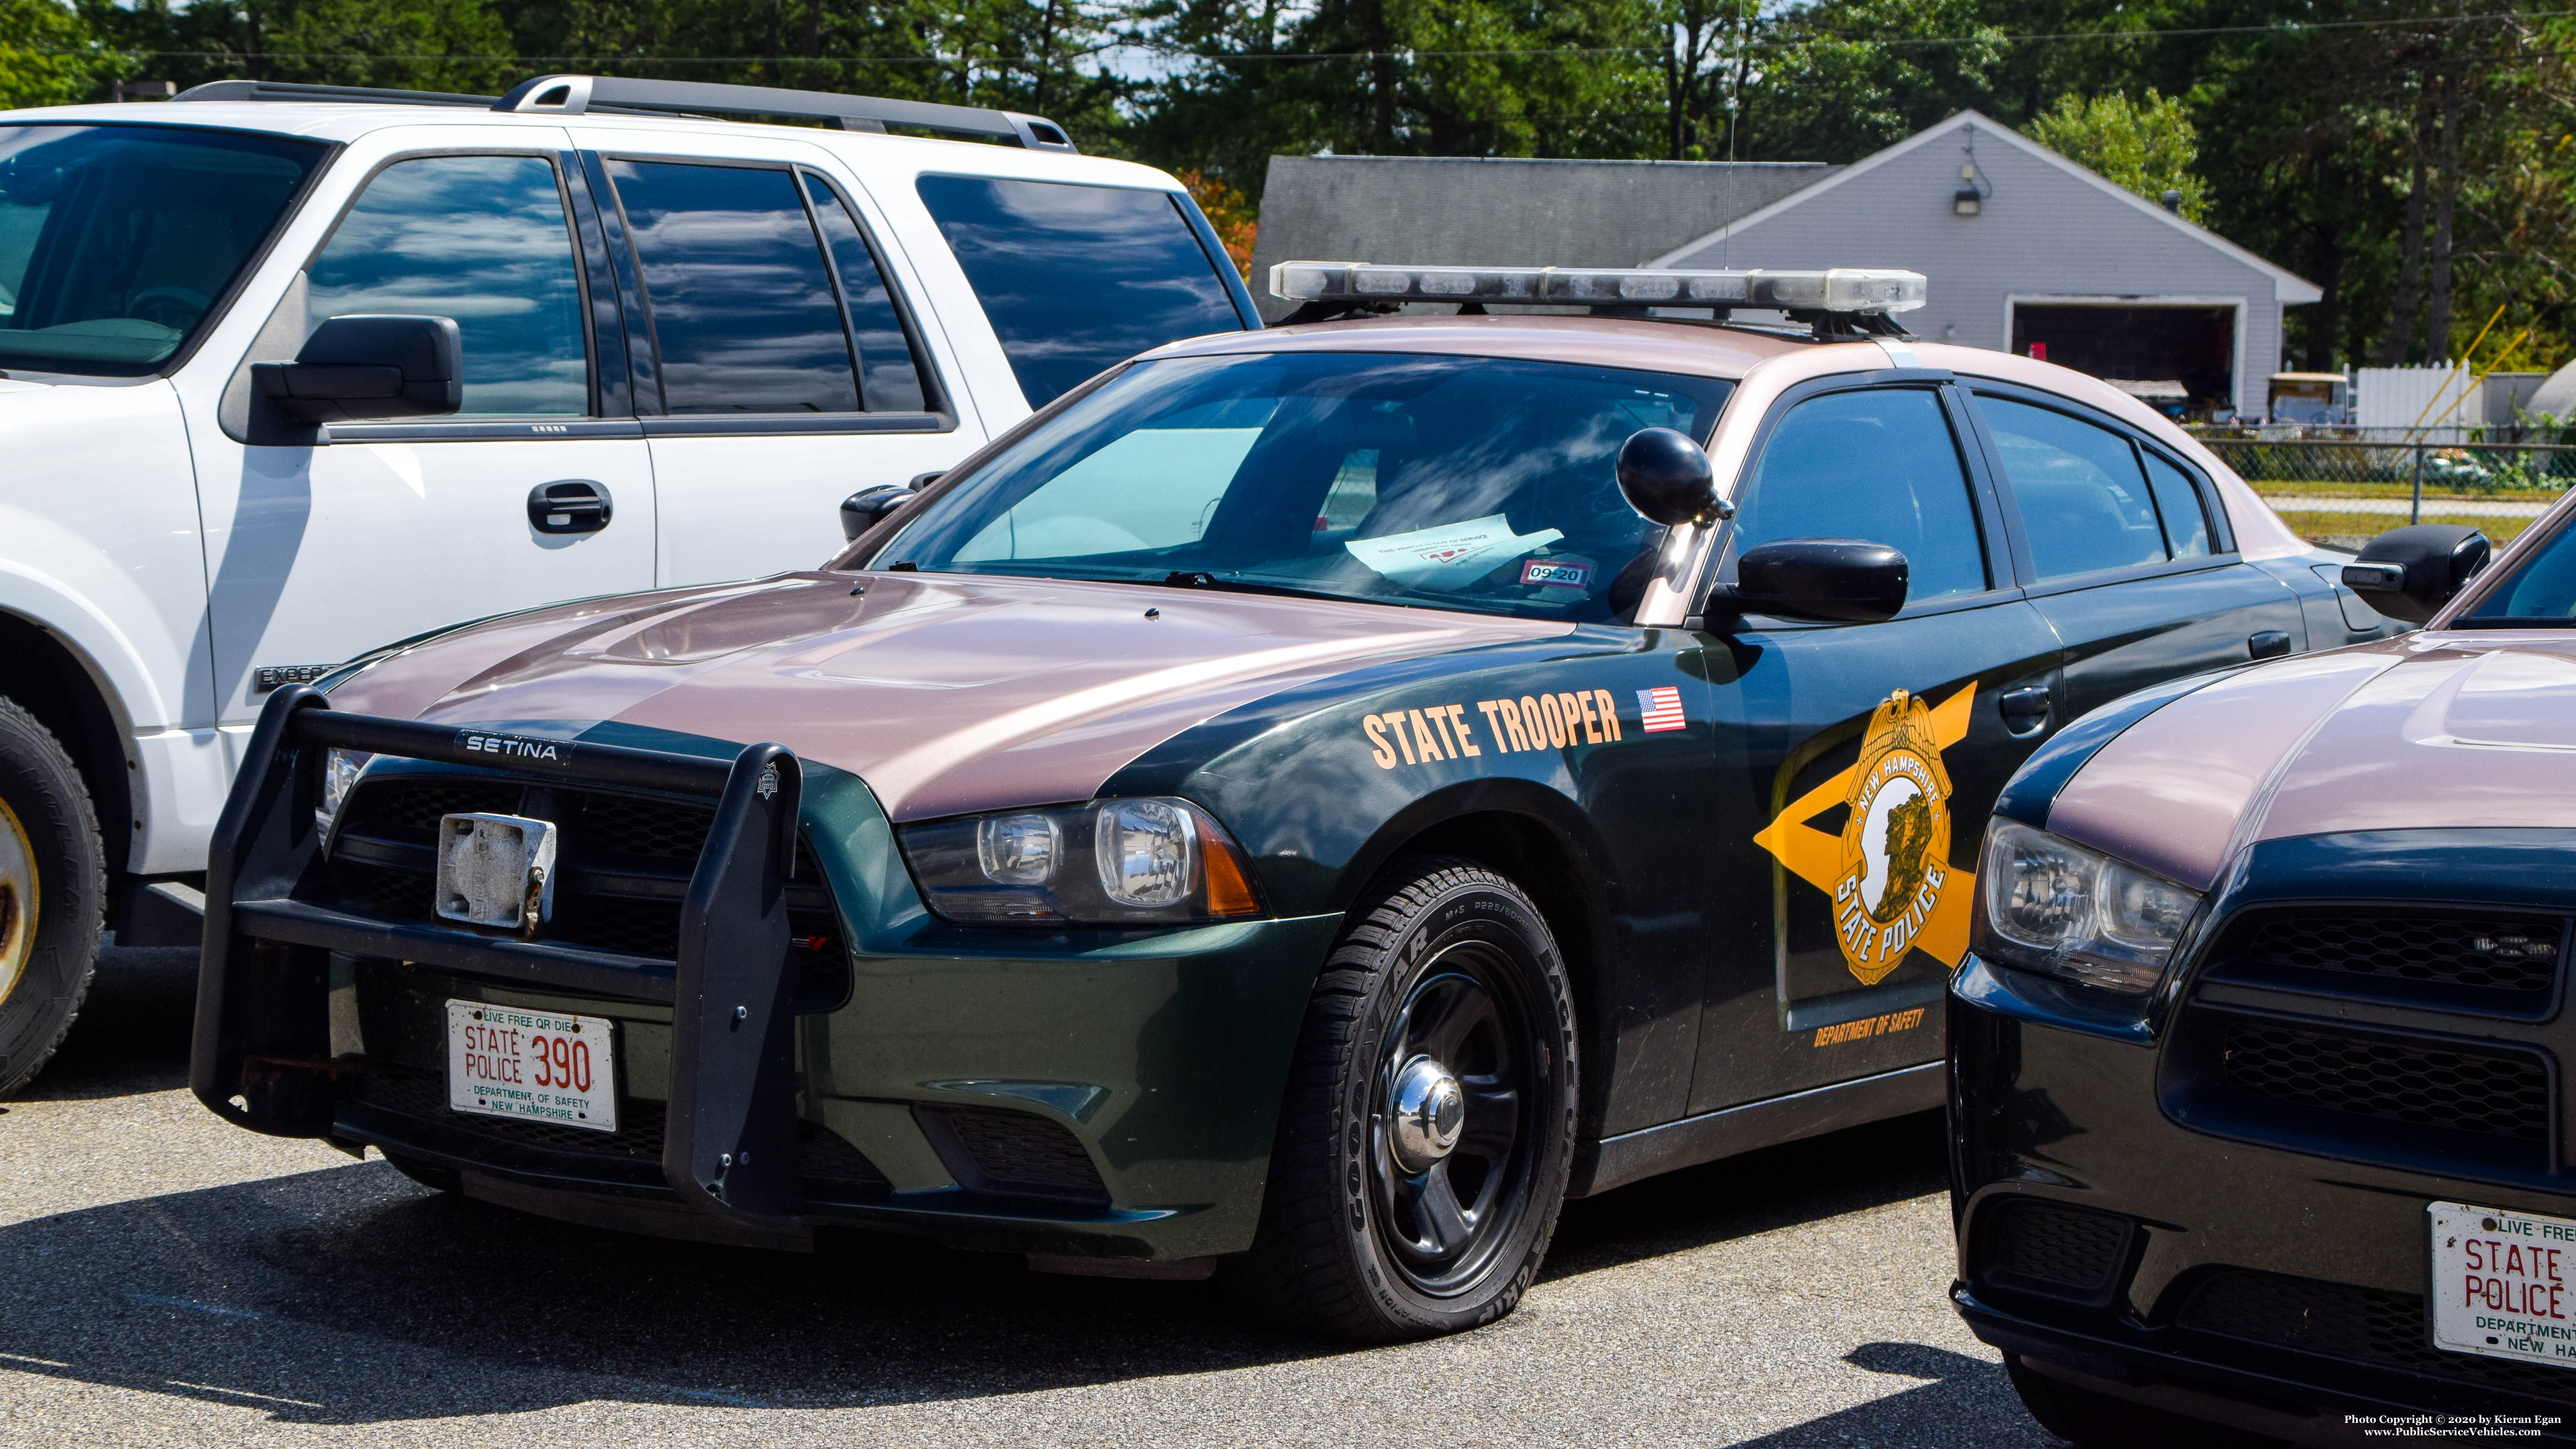 A photo  of New Hampshire State Police
            Cruiser 390, a 2011-2014 Dodge Charger             taken by Kieran Egan